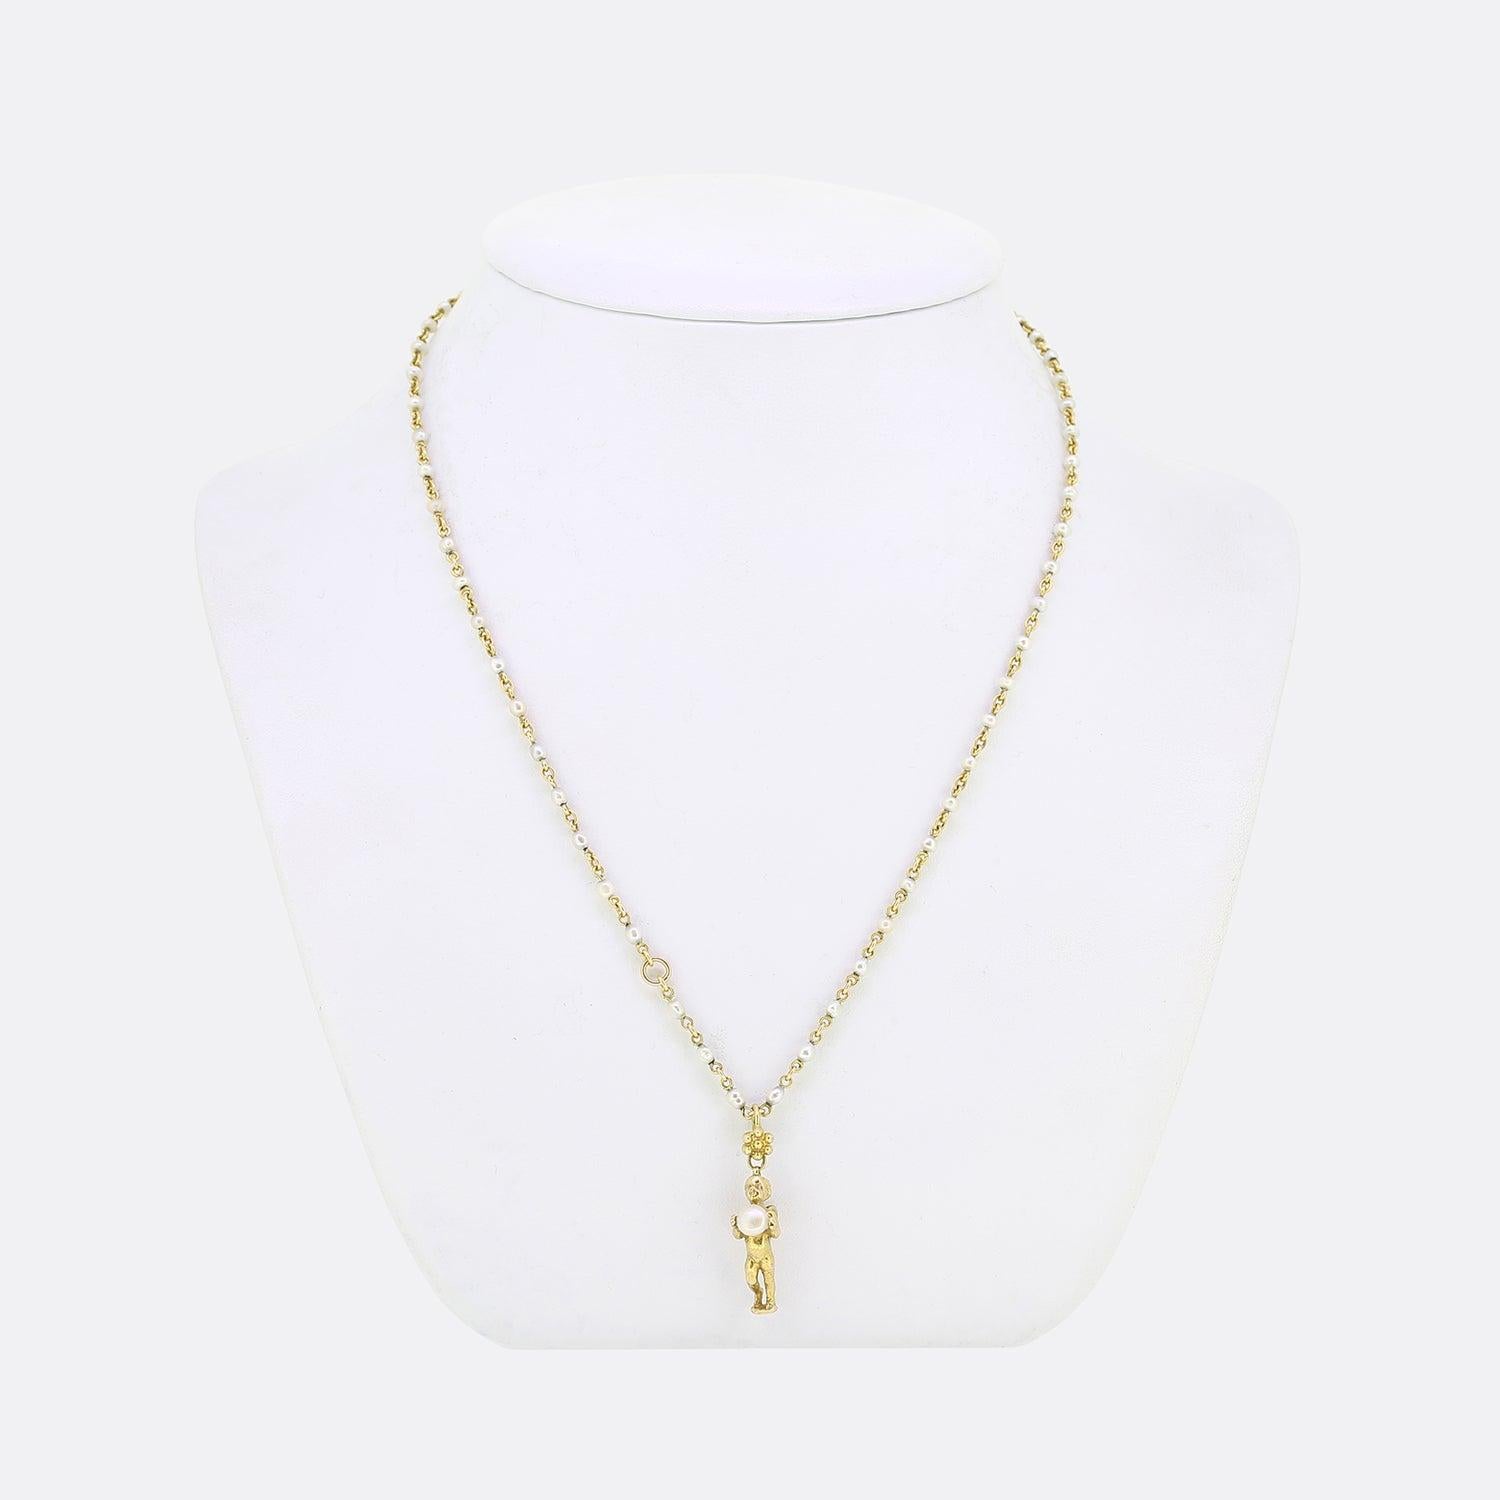 This is a fabulous antique pearl set necklace from the iconic, Carlo Giuliano. The pendant here has been crafted into a shape of an ascending cherub cradling a round button pearl. The winged figure showcases close attention to detail and hangs from